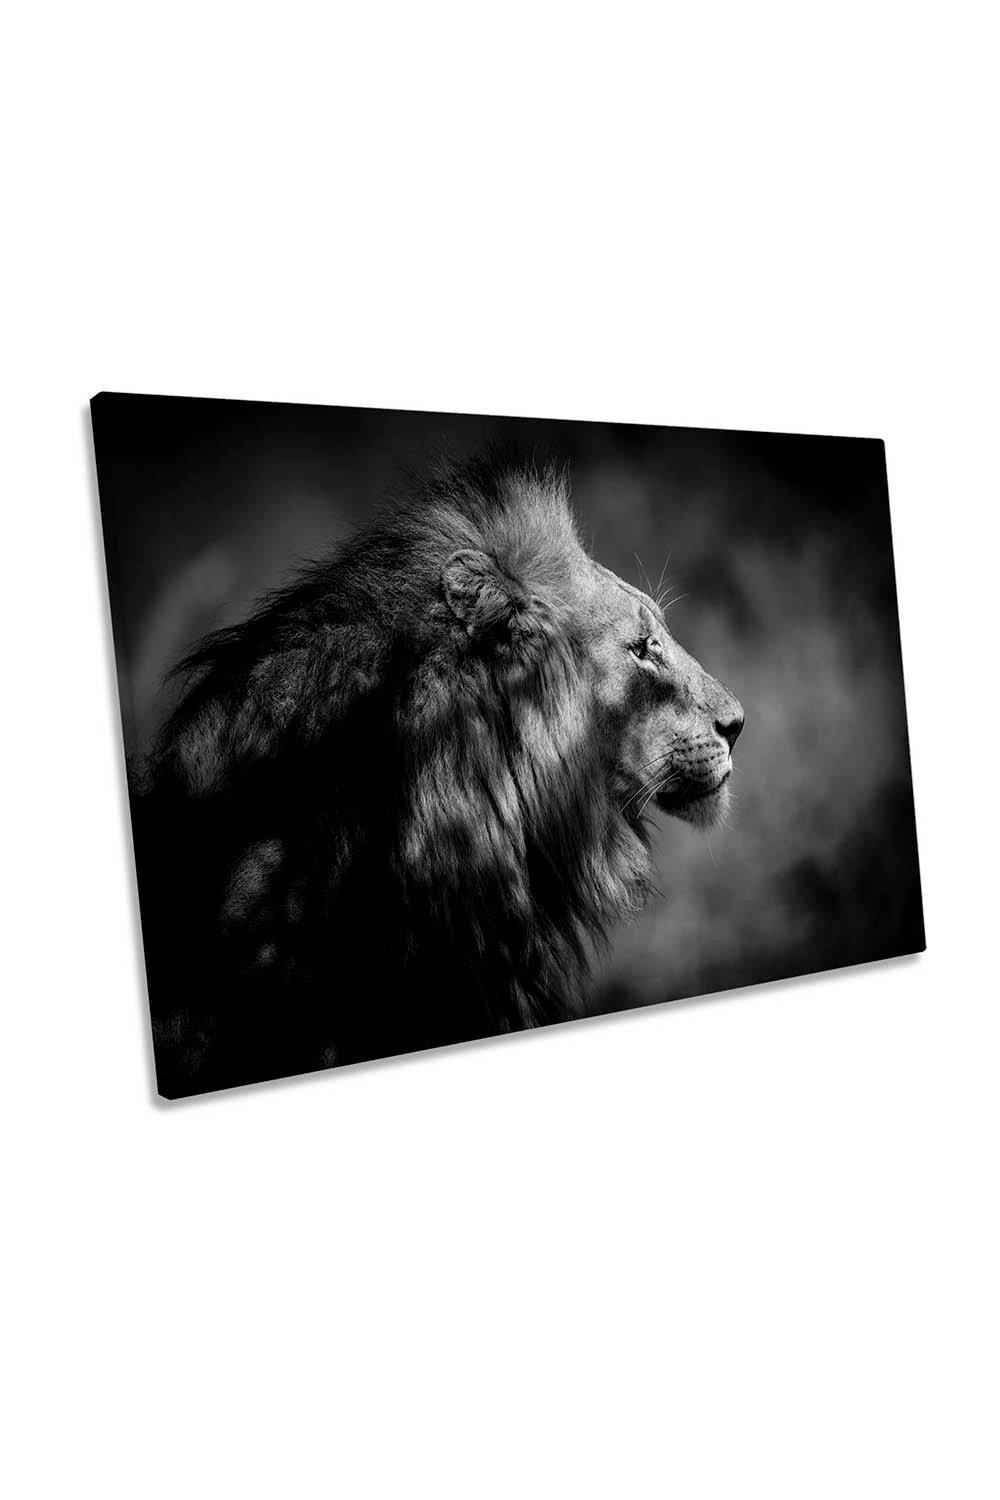 The Male Lion Black and White Animal Canvas Wall Art Picture Print